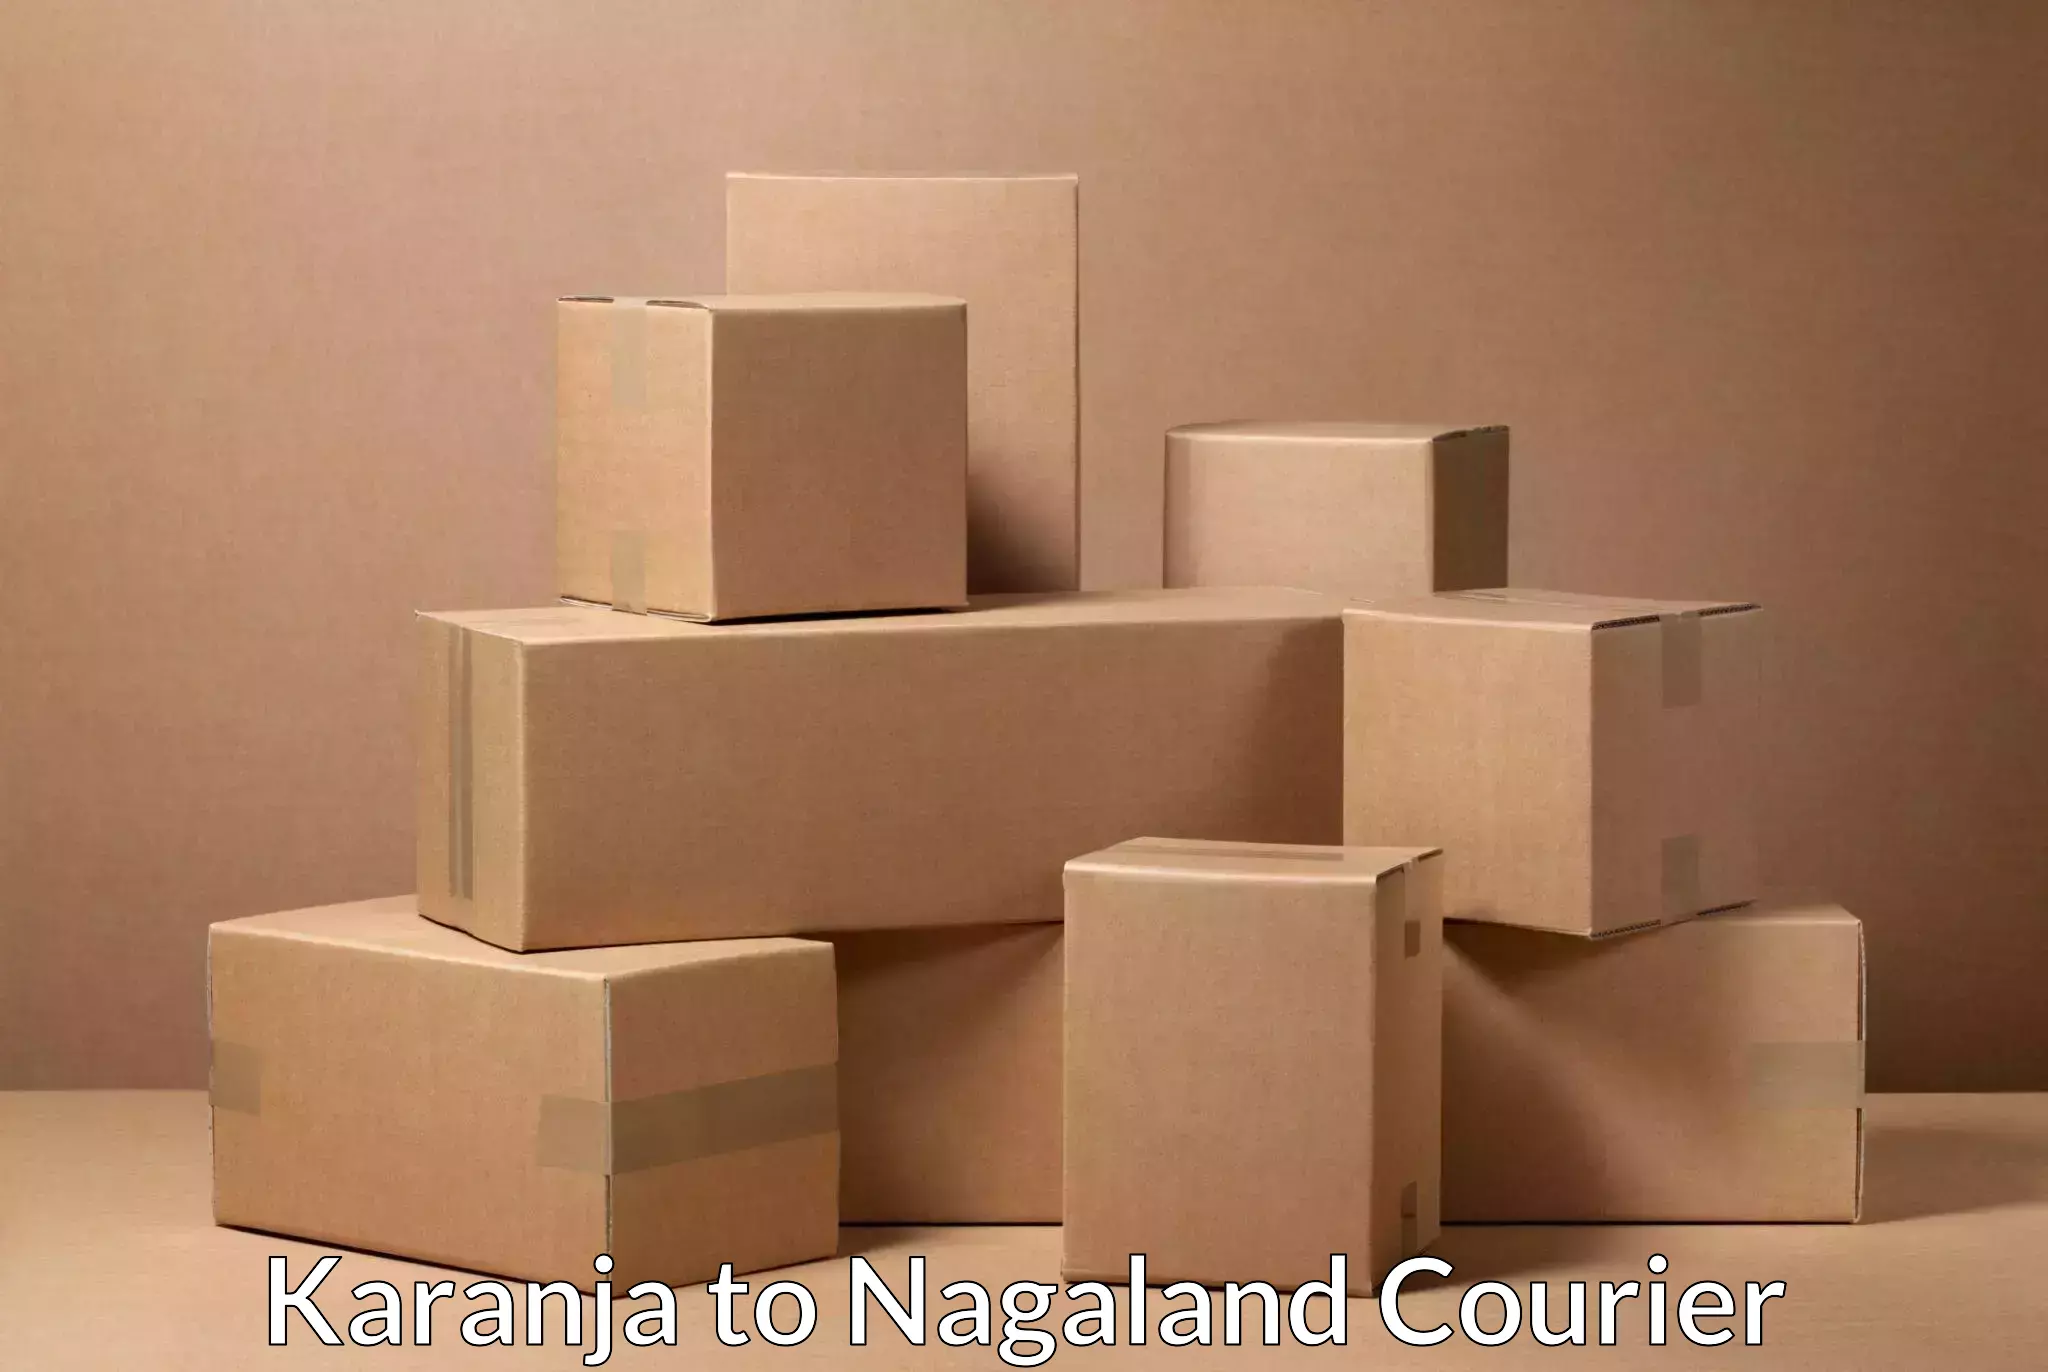 Personal parcel delivery in Karanja to Nagaland